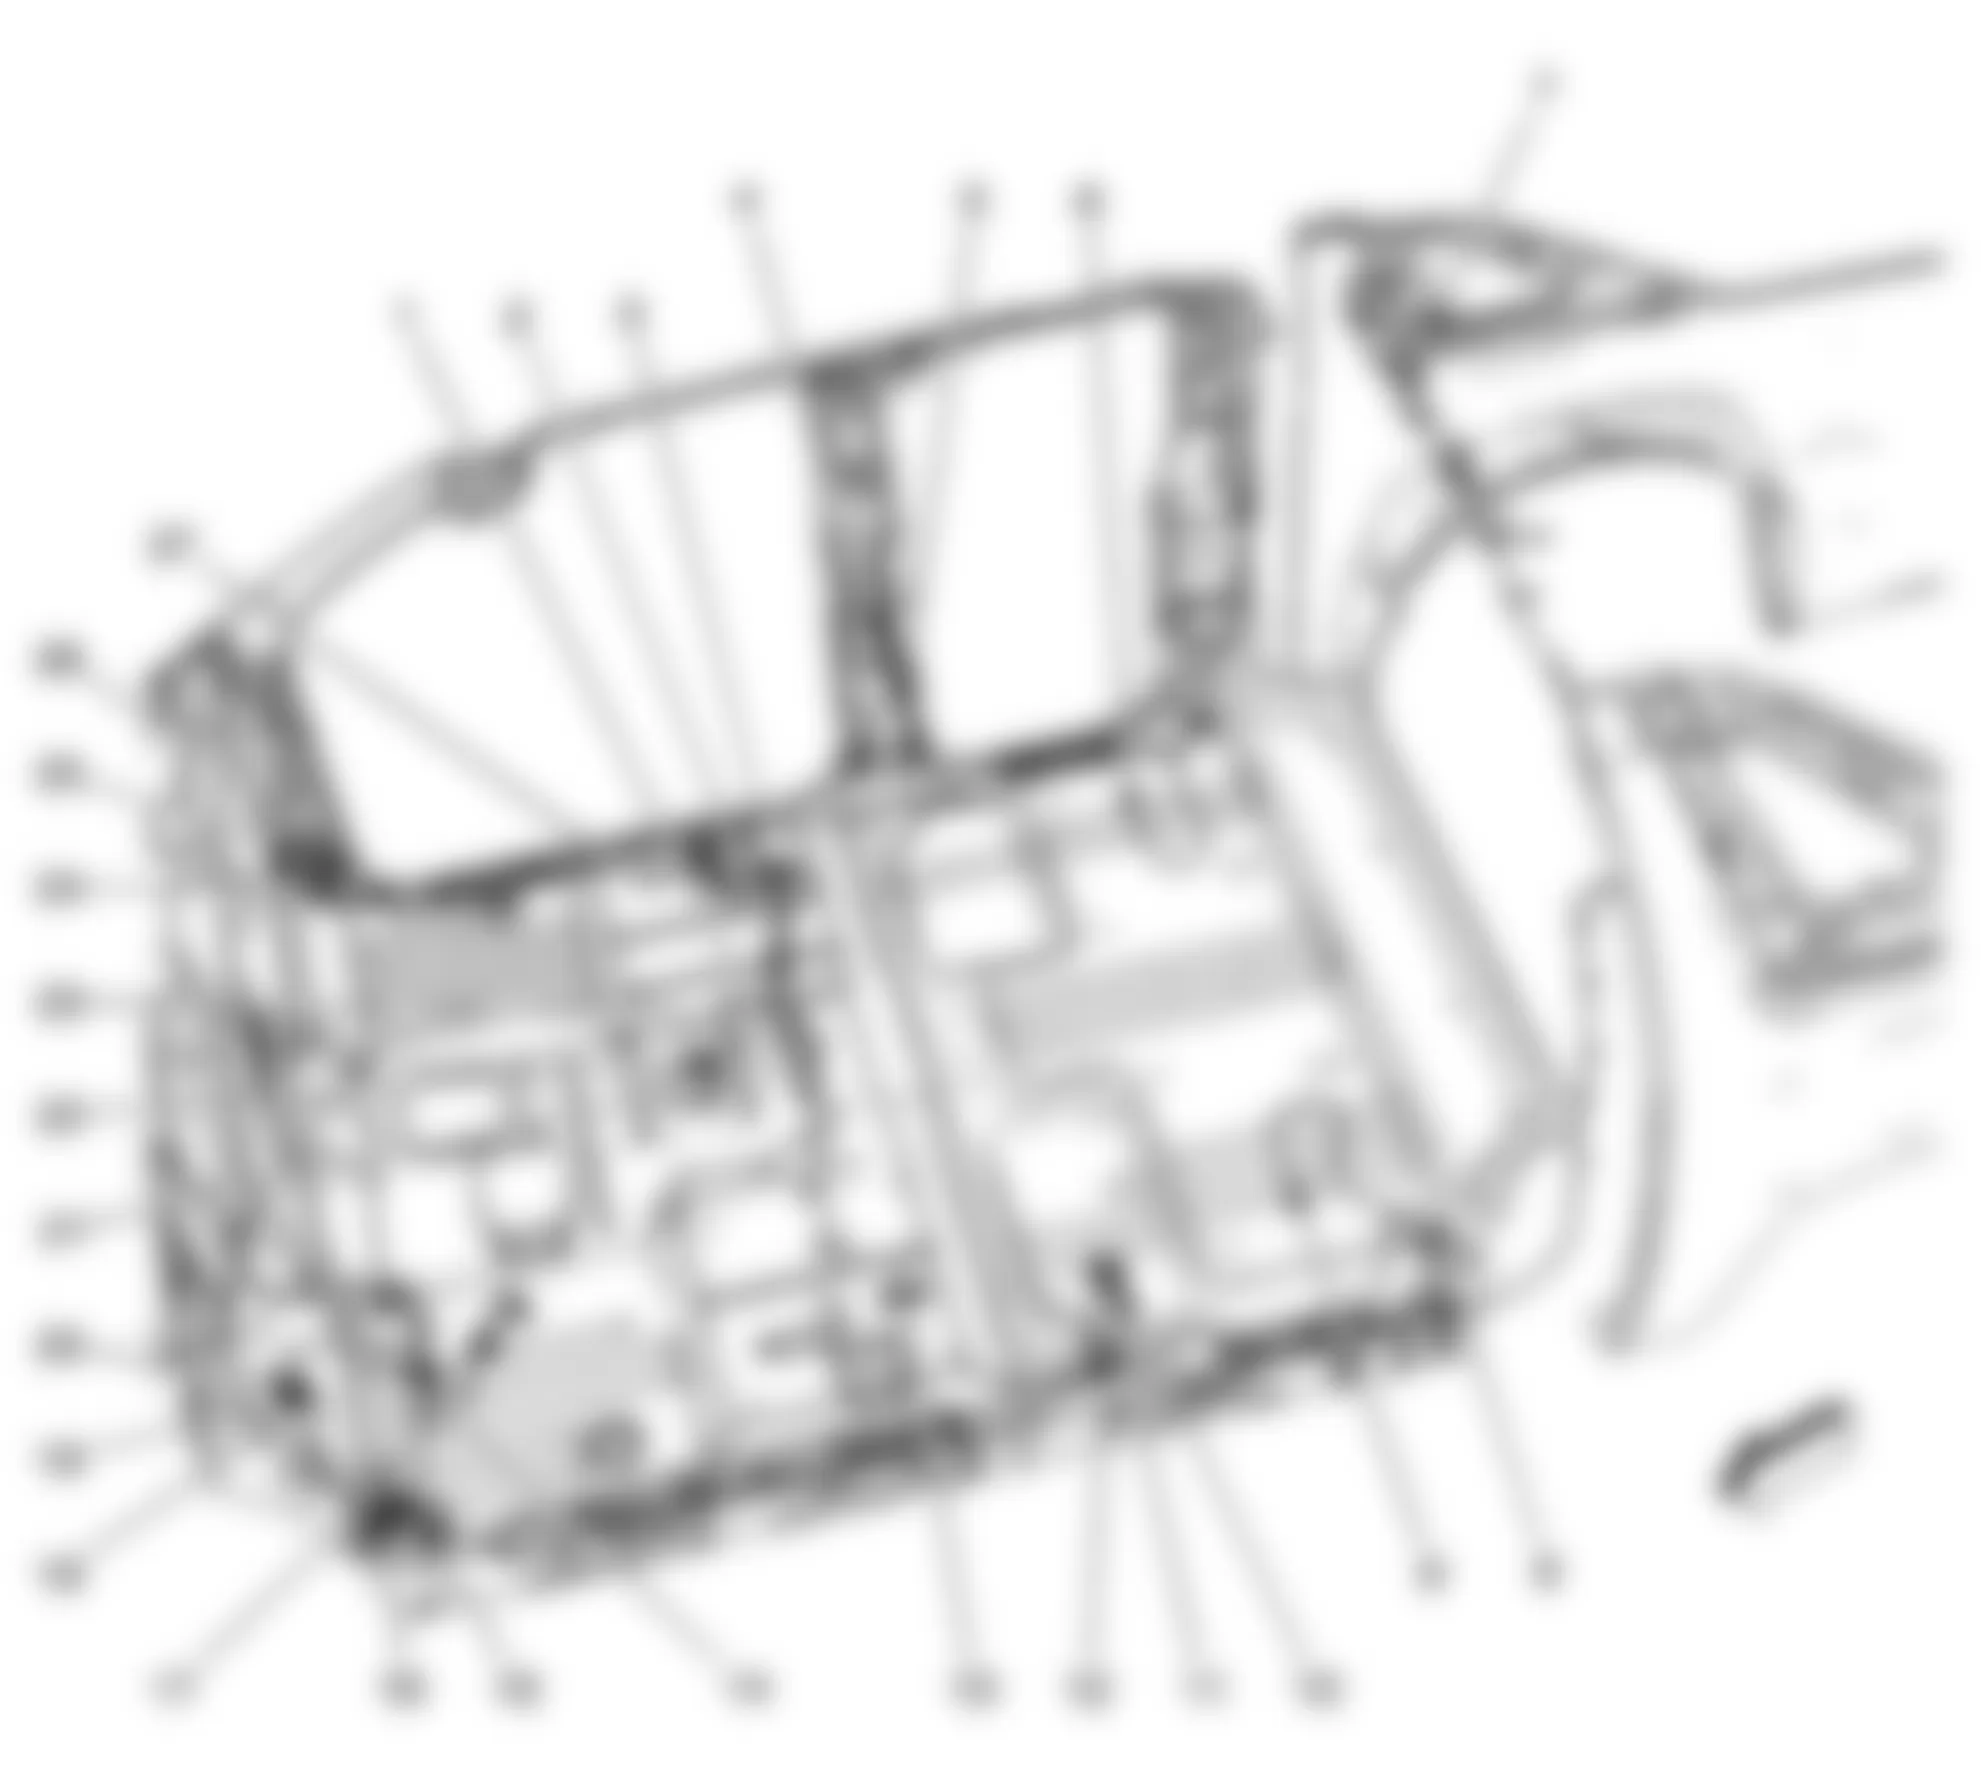 GMC Yukon Hybrid 2008 - Component Locations -  Passenger Compartment (Except One Piece Liftgate)